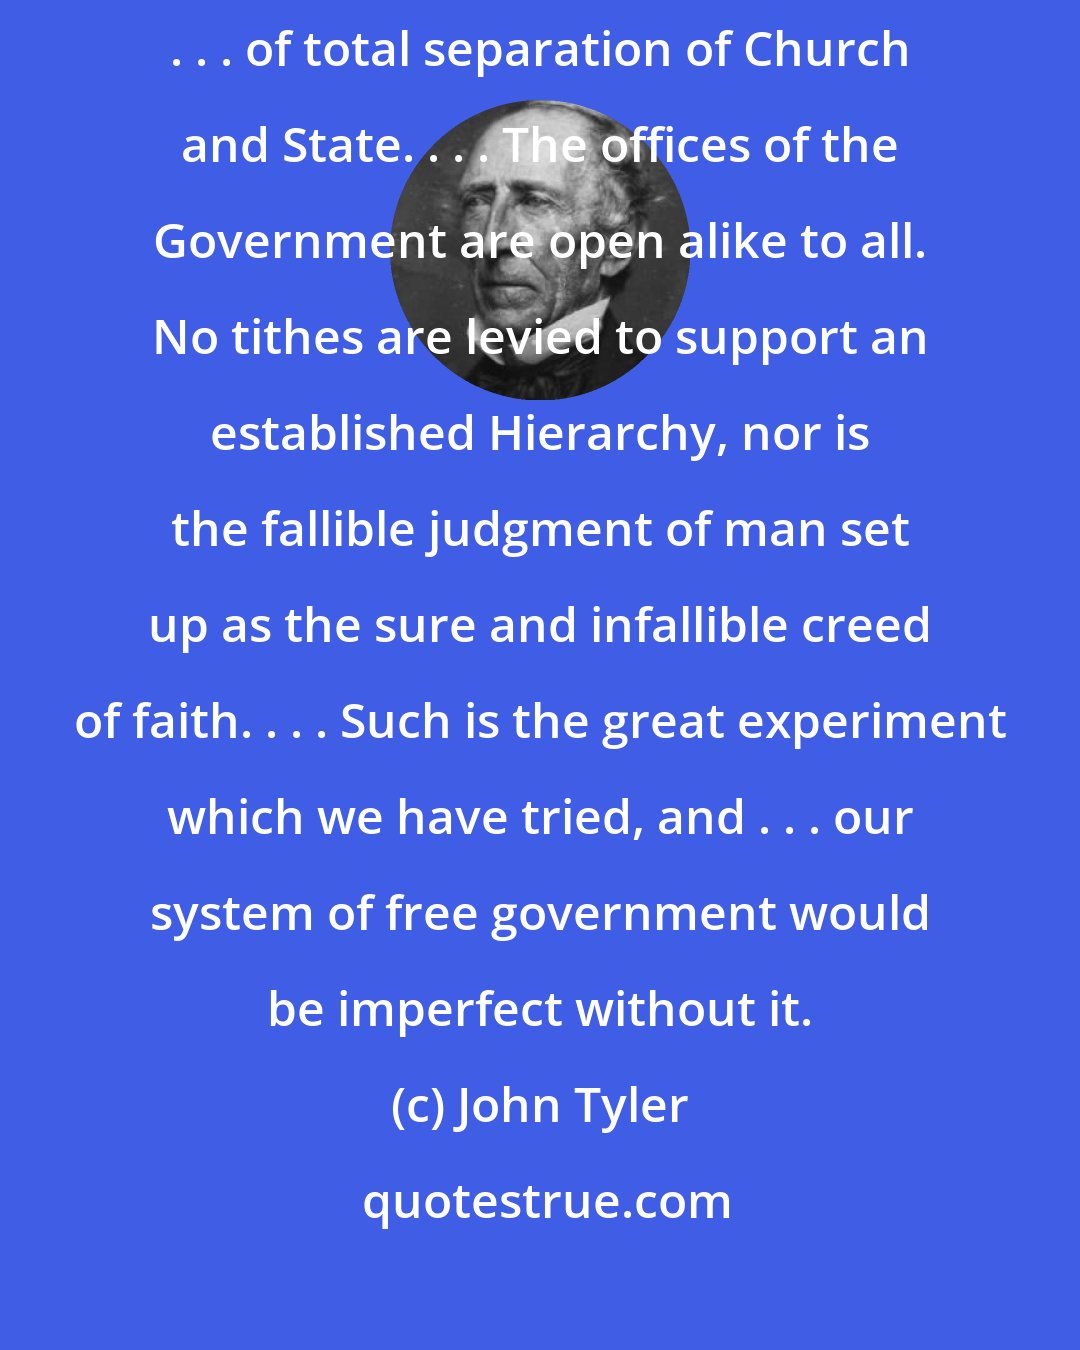 John Tyler: The United States has adventured upon a great and noble experiment . . . of total separation of Church and State. . . . The offices of the Government are open alike to all. No tithes are levied to support an established Hierarchy, nor is the fallible judgment of man set up as the sure and infallible creed of faith. . . . Such is the great experiment which we have tried, and . . . our system of free government would be imperfect without it.